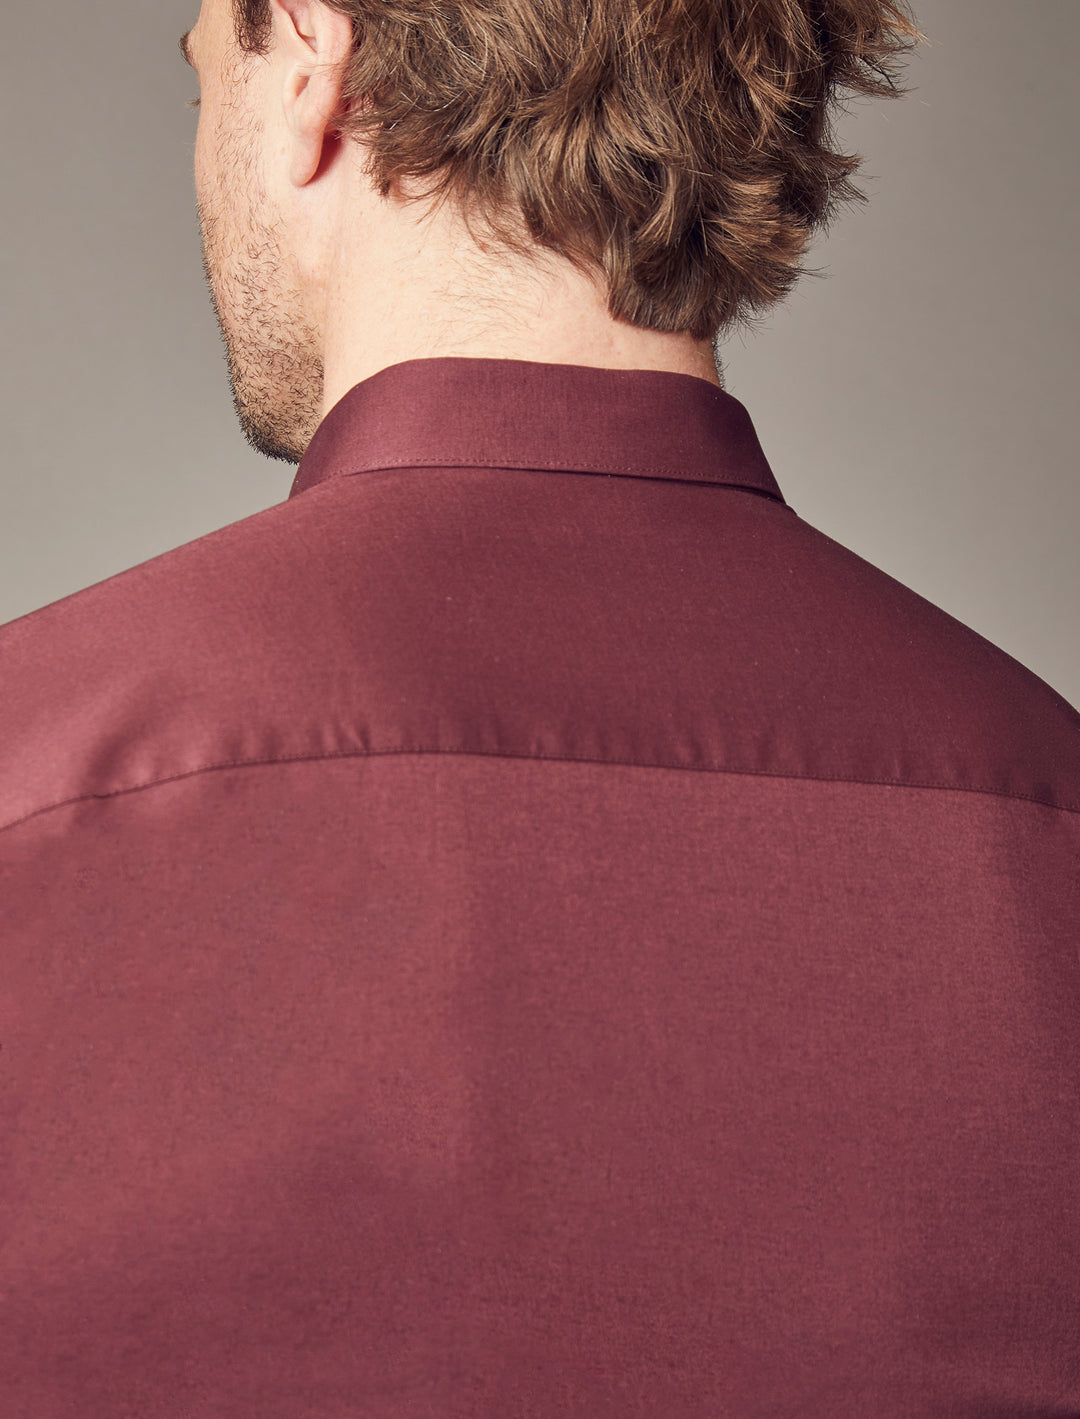 A Tapered Menswear burgundy shirt, showcasing a tapered fit that accentuates the muscle-fit qualities, creating a flattering and sharply defined look.